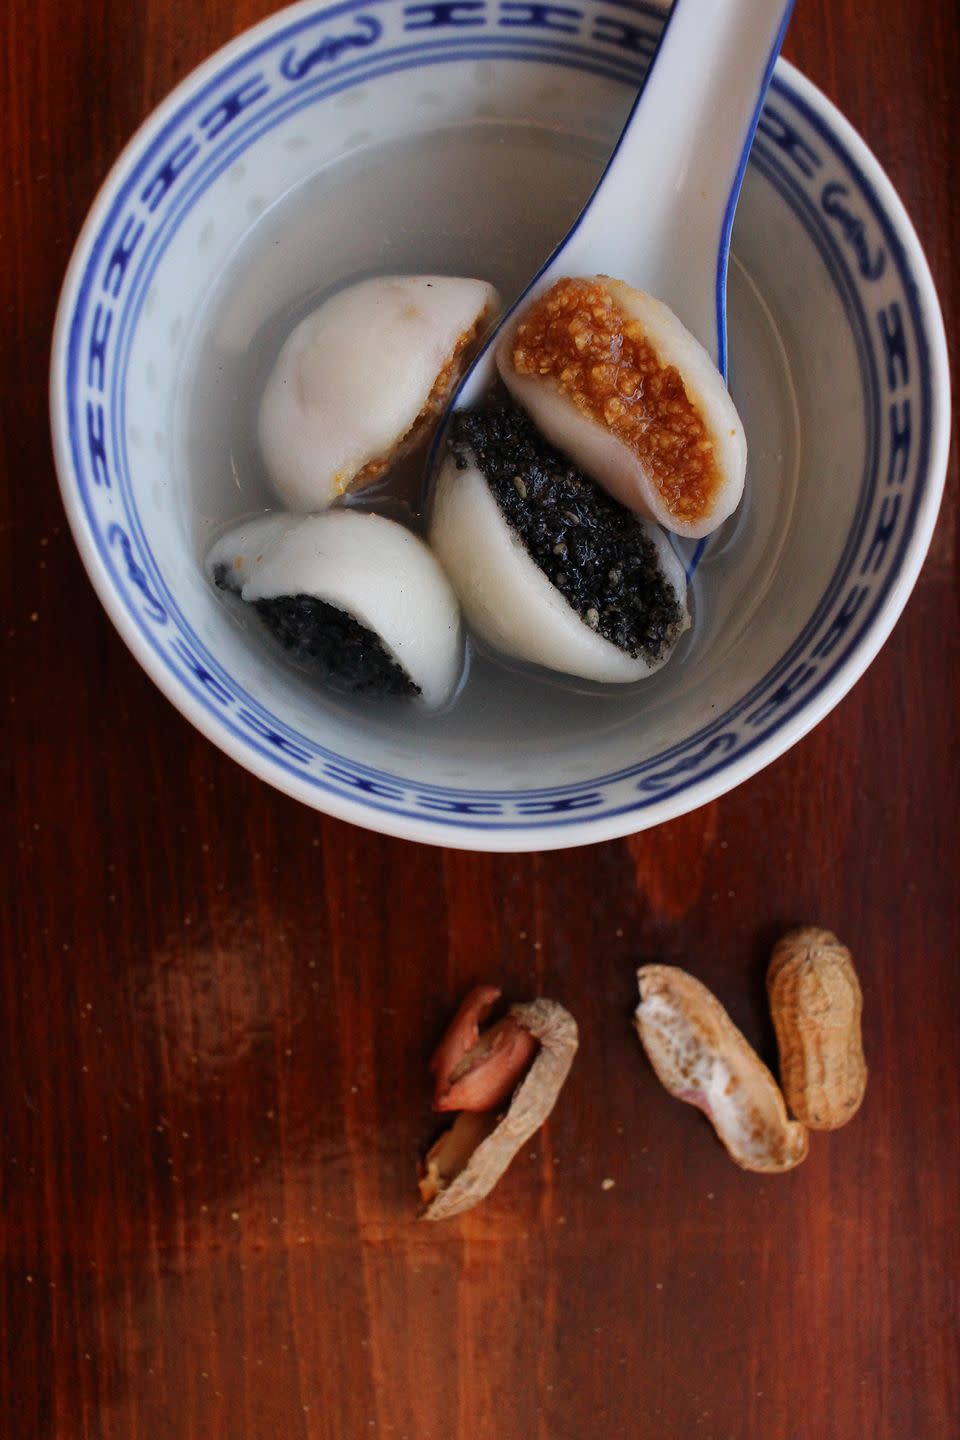 glutinous rice balls in a blue and white dish on a wooden background